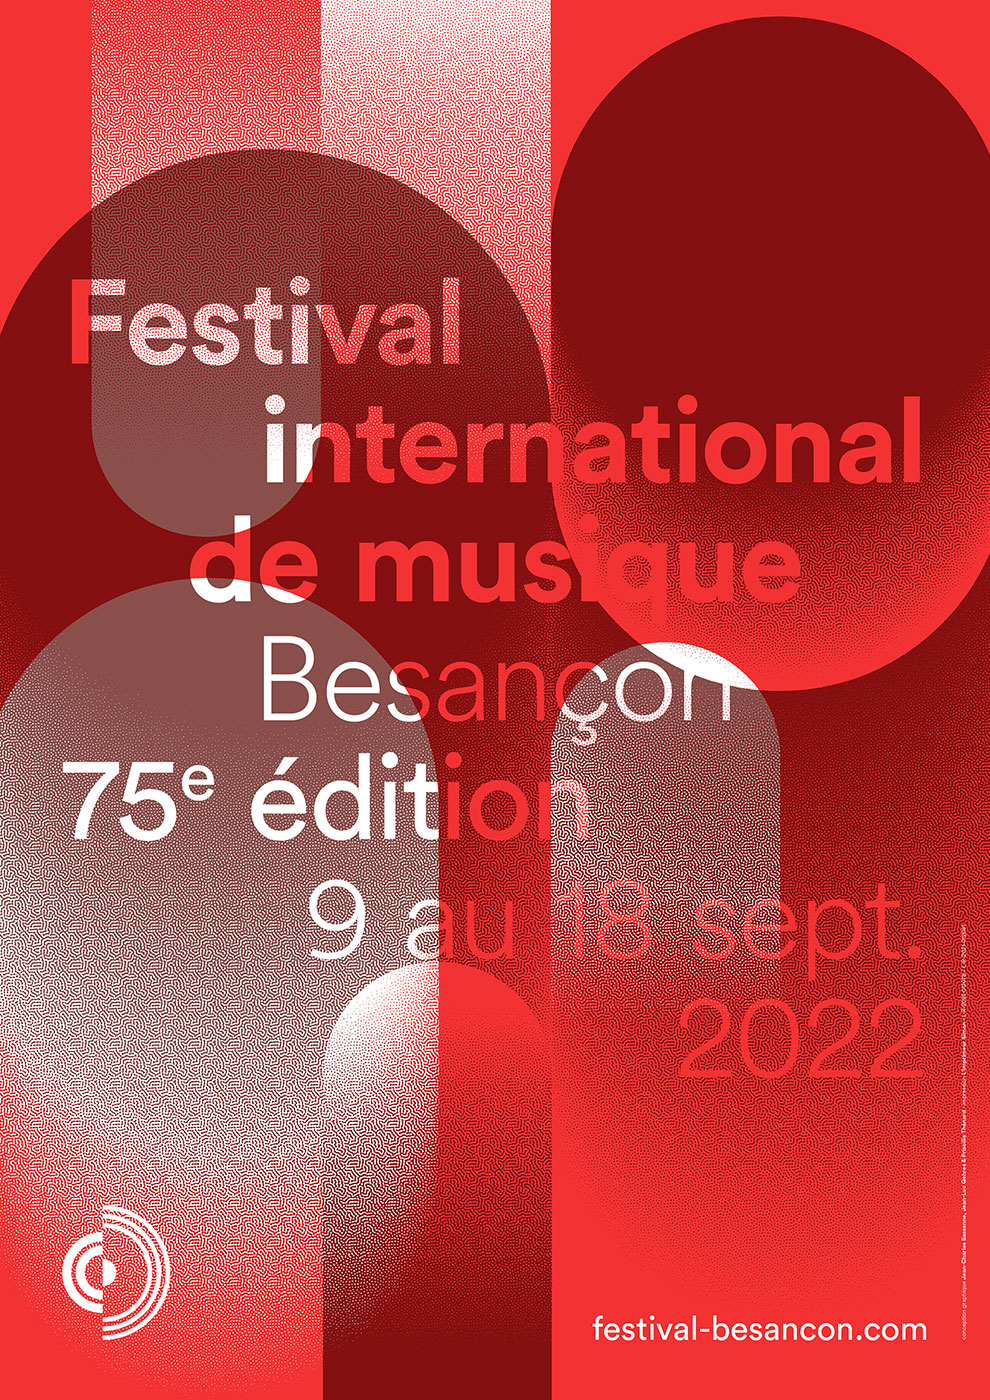 75th edition – September 9 to 18, 2022